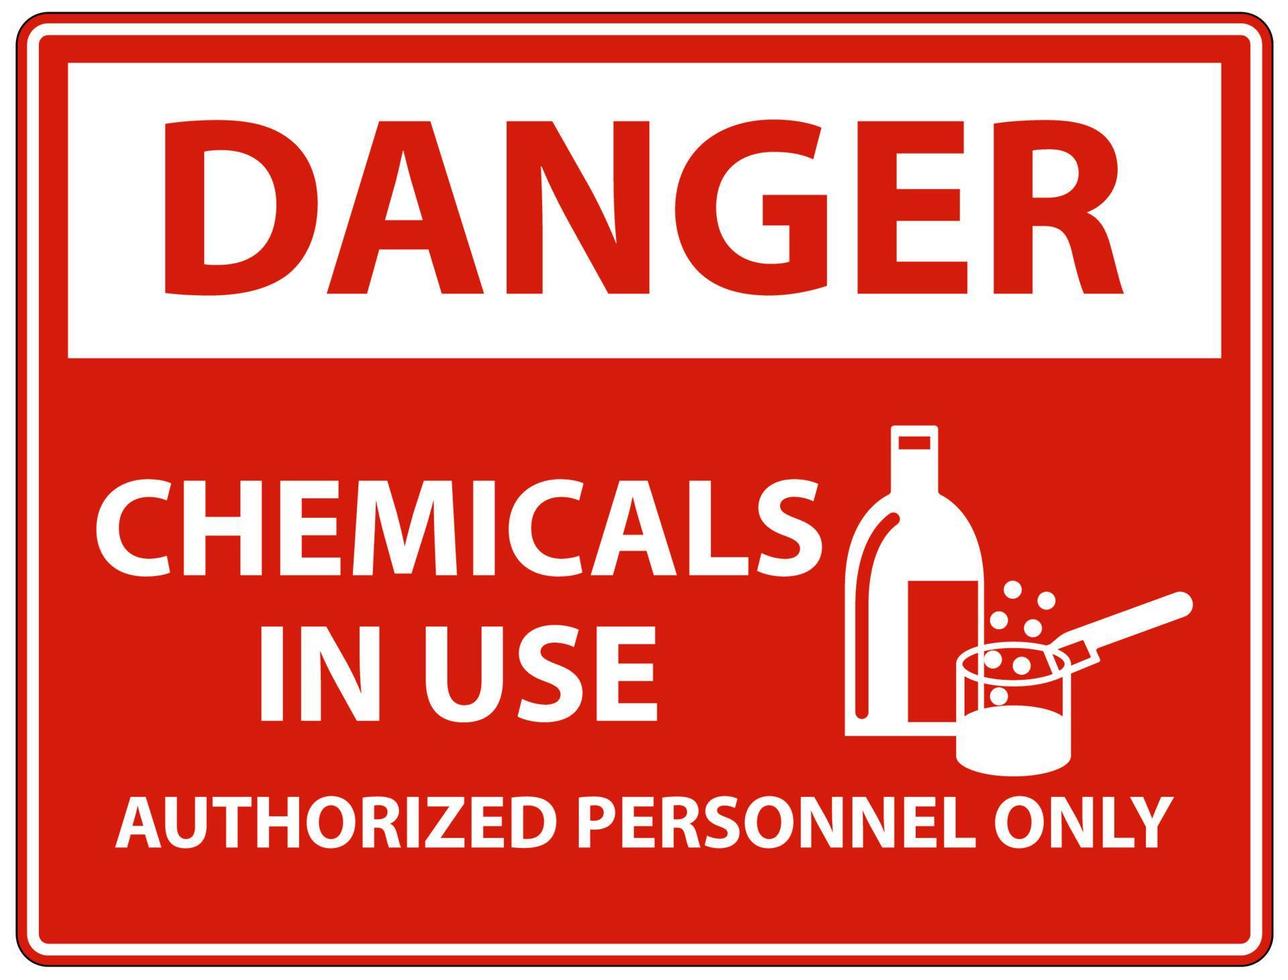 Danger Chemicals In Use Symbol Sign On White Background vector